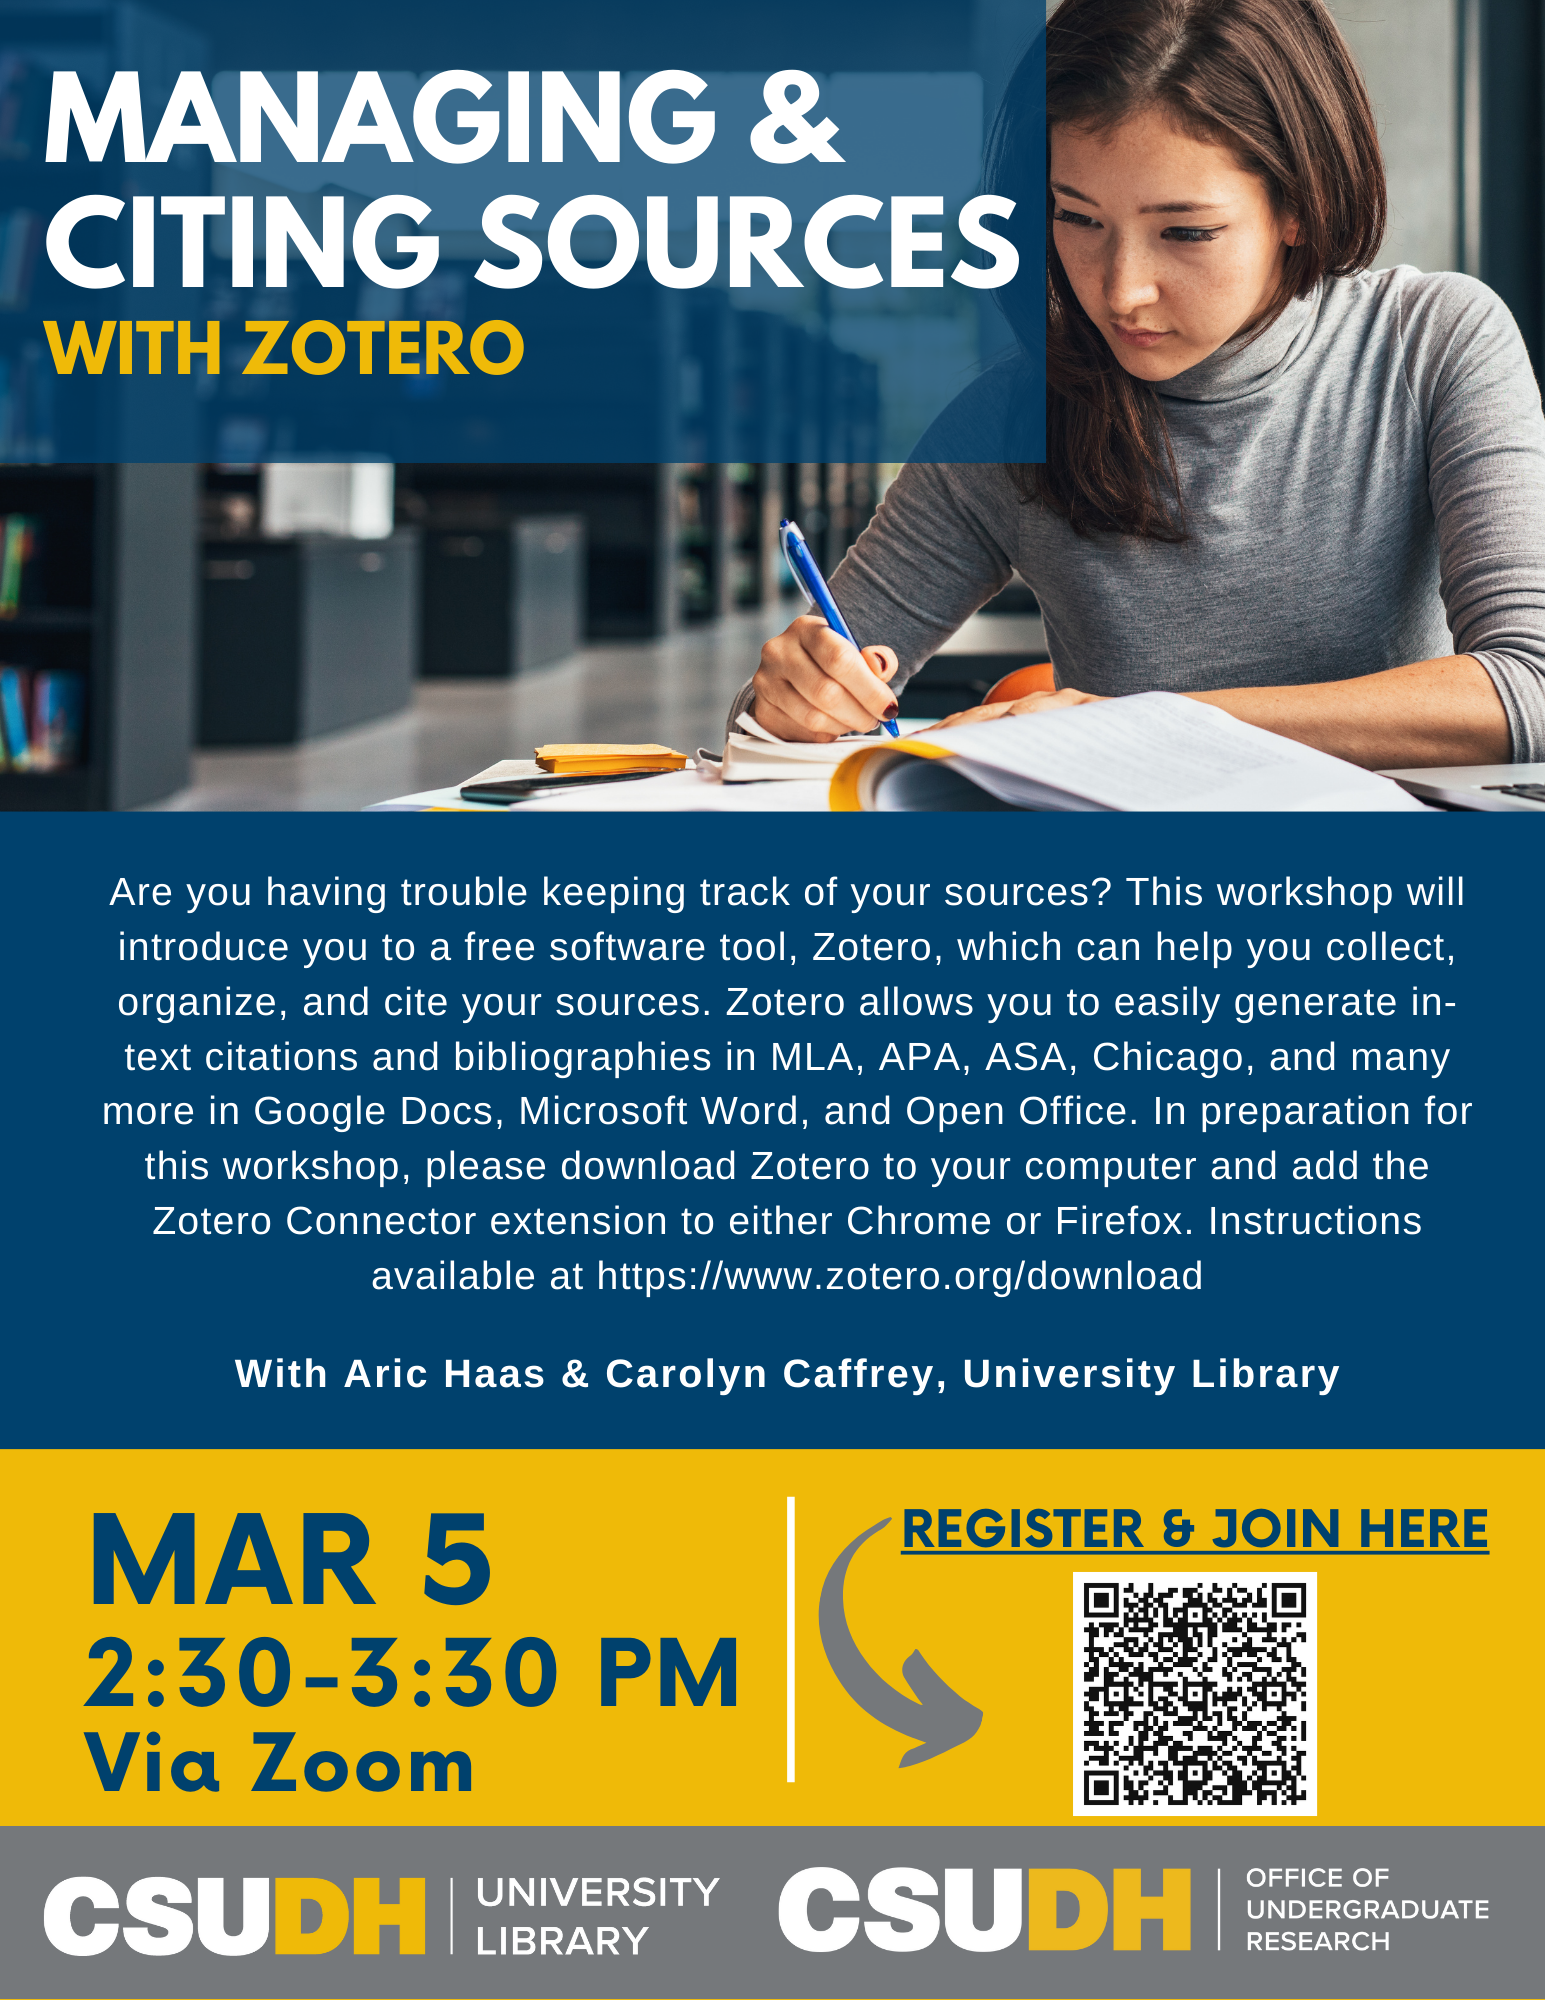 Managing & Citing Sources with Zotero Flyer 